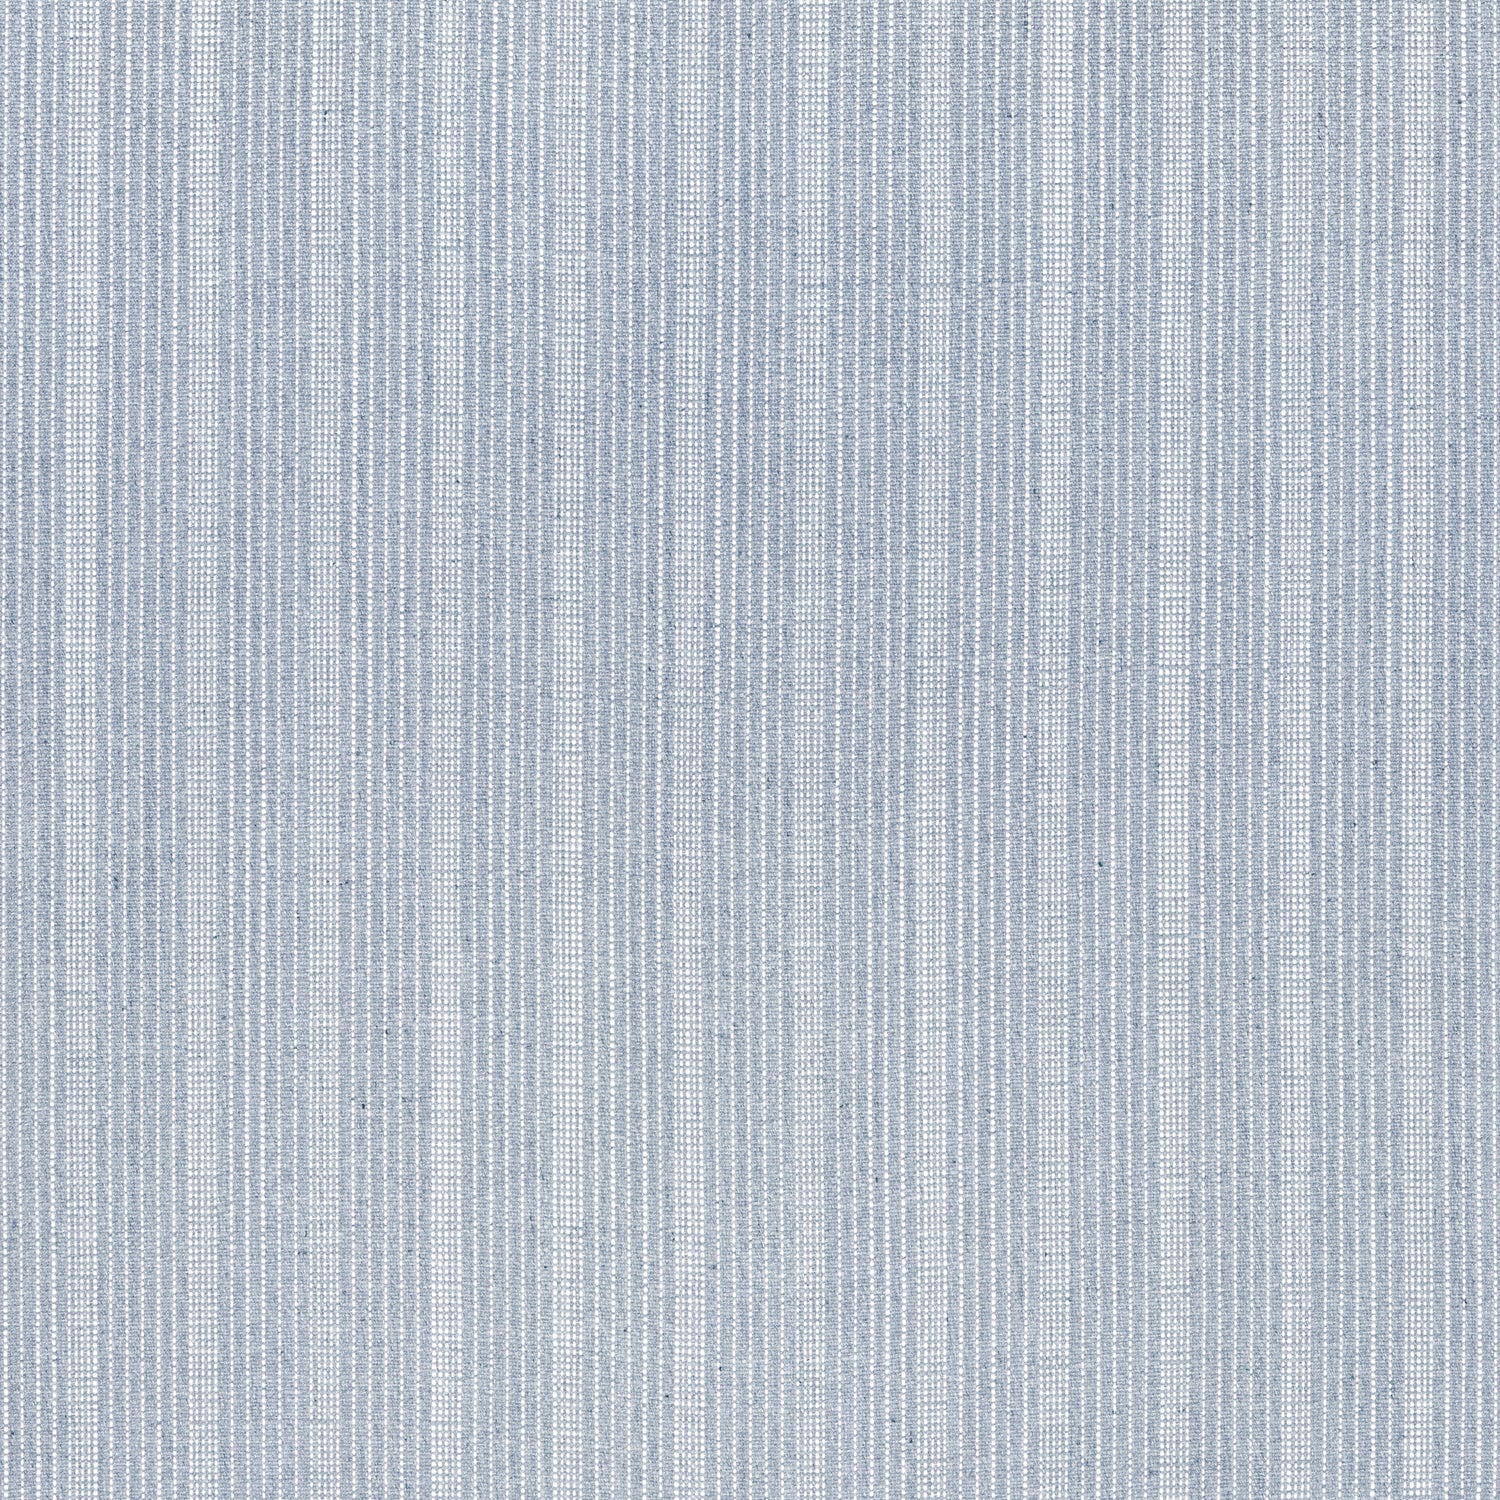 Ebro Stripe fabric in horizon color - pattern number W8509 - by Thibaut in the Villa collection